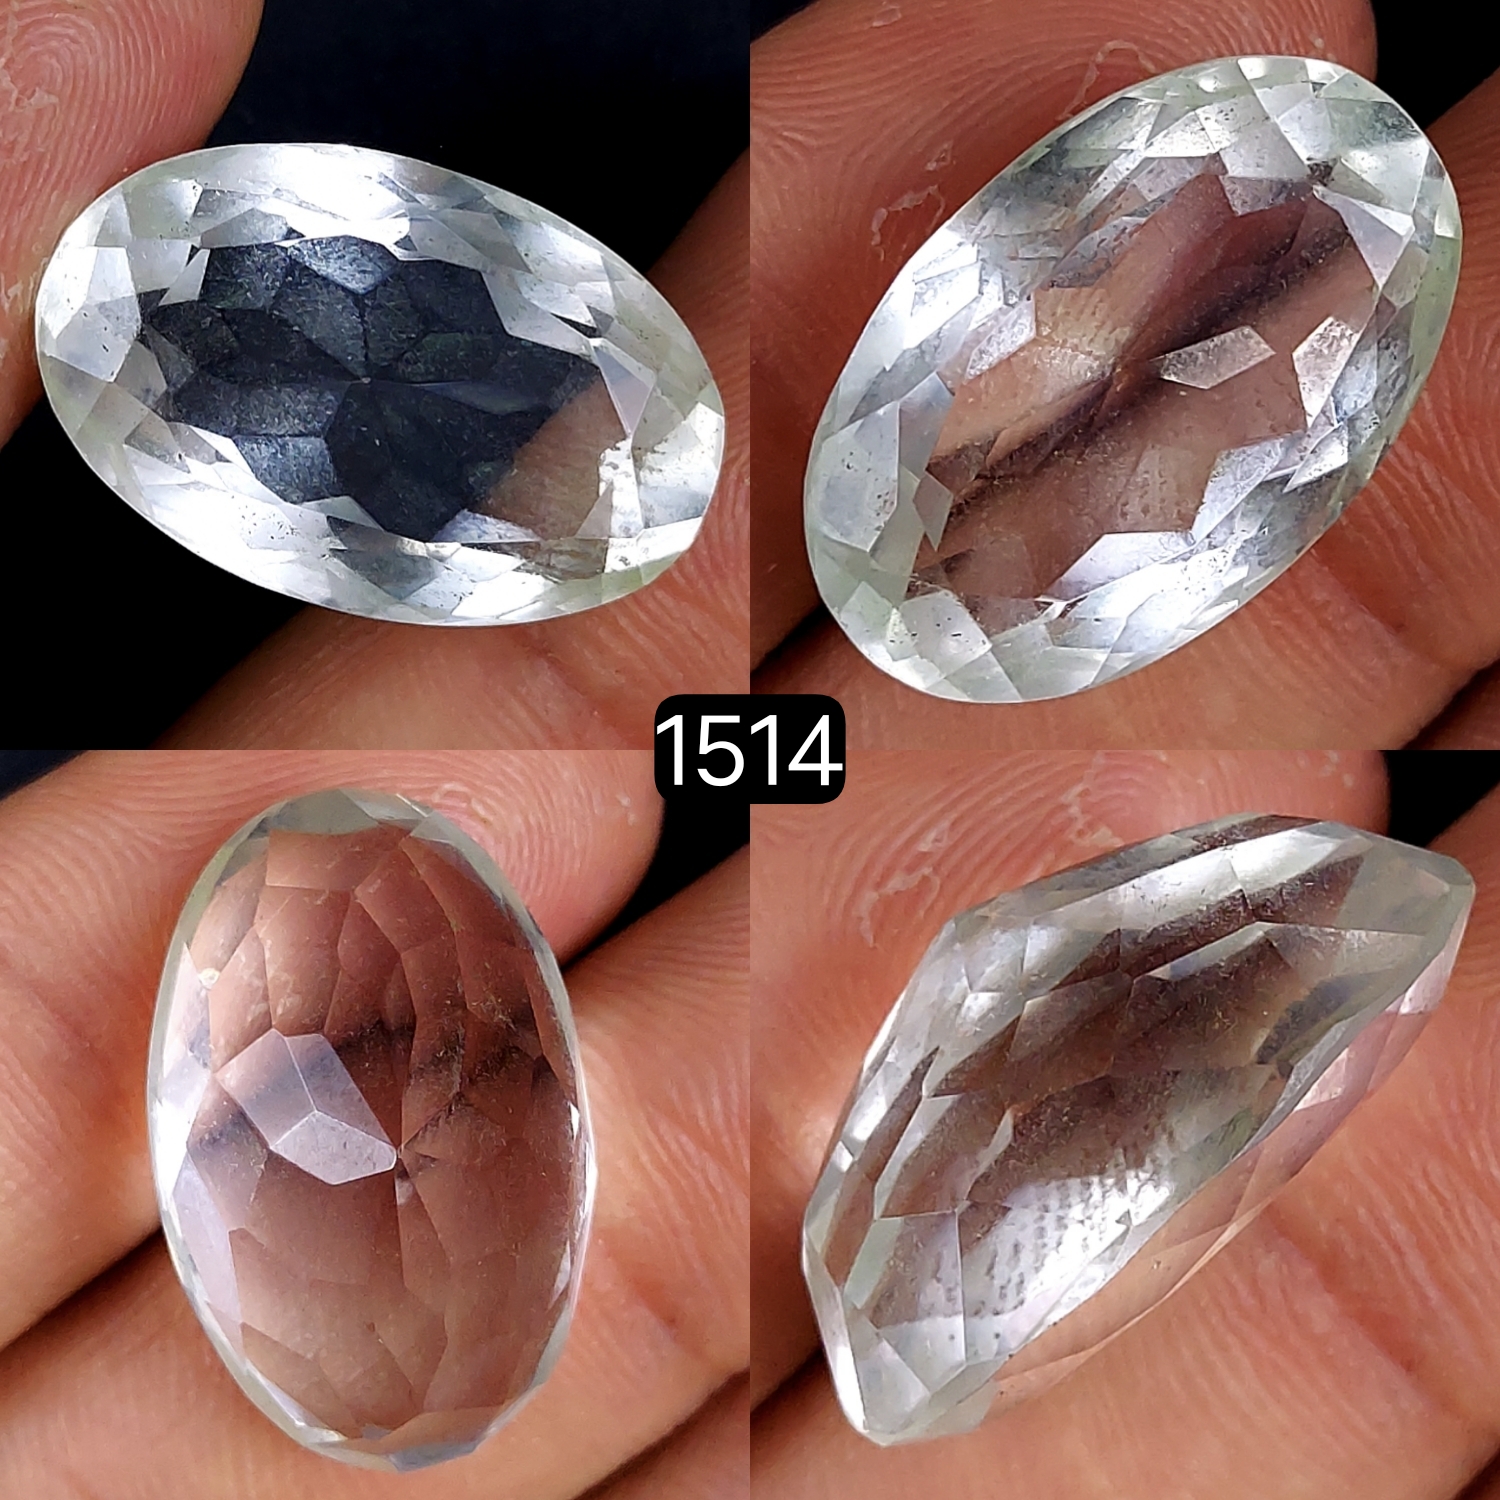 1Pcs 28Cts Natural Crystal Quartz Faceted Oval Shape Loose Gemstone25x16mm#1514